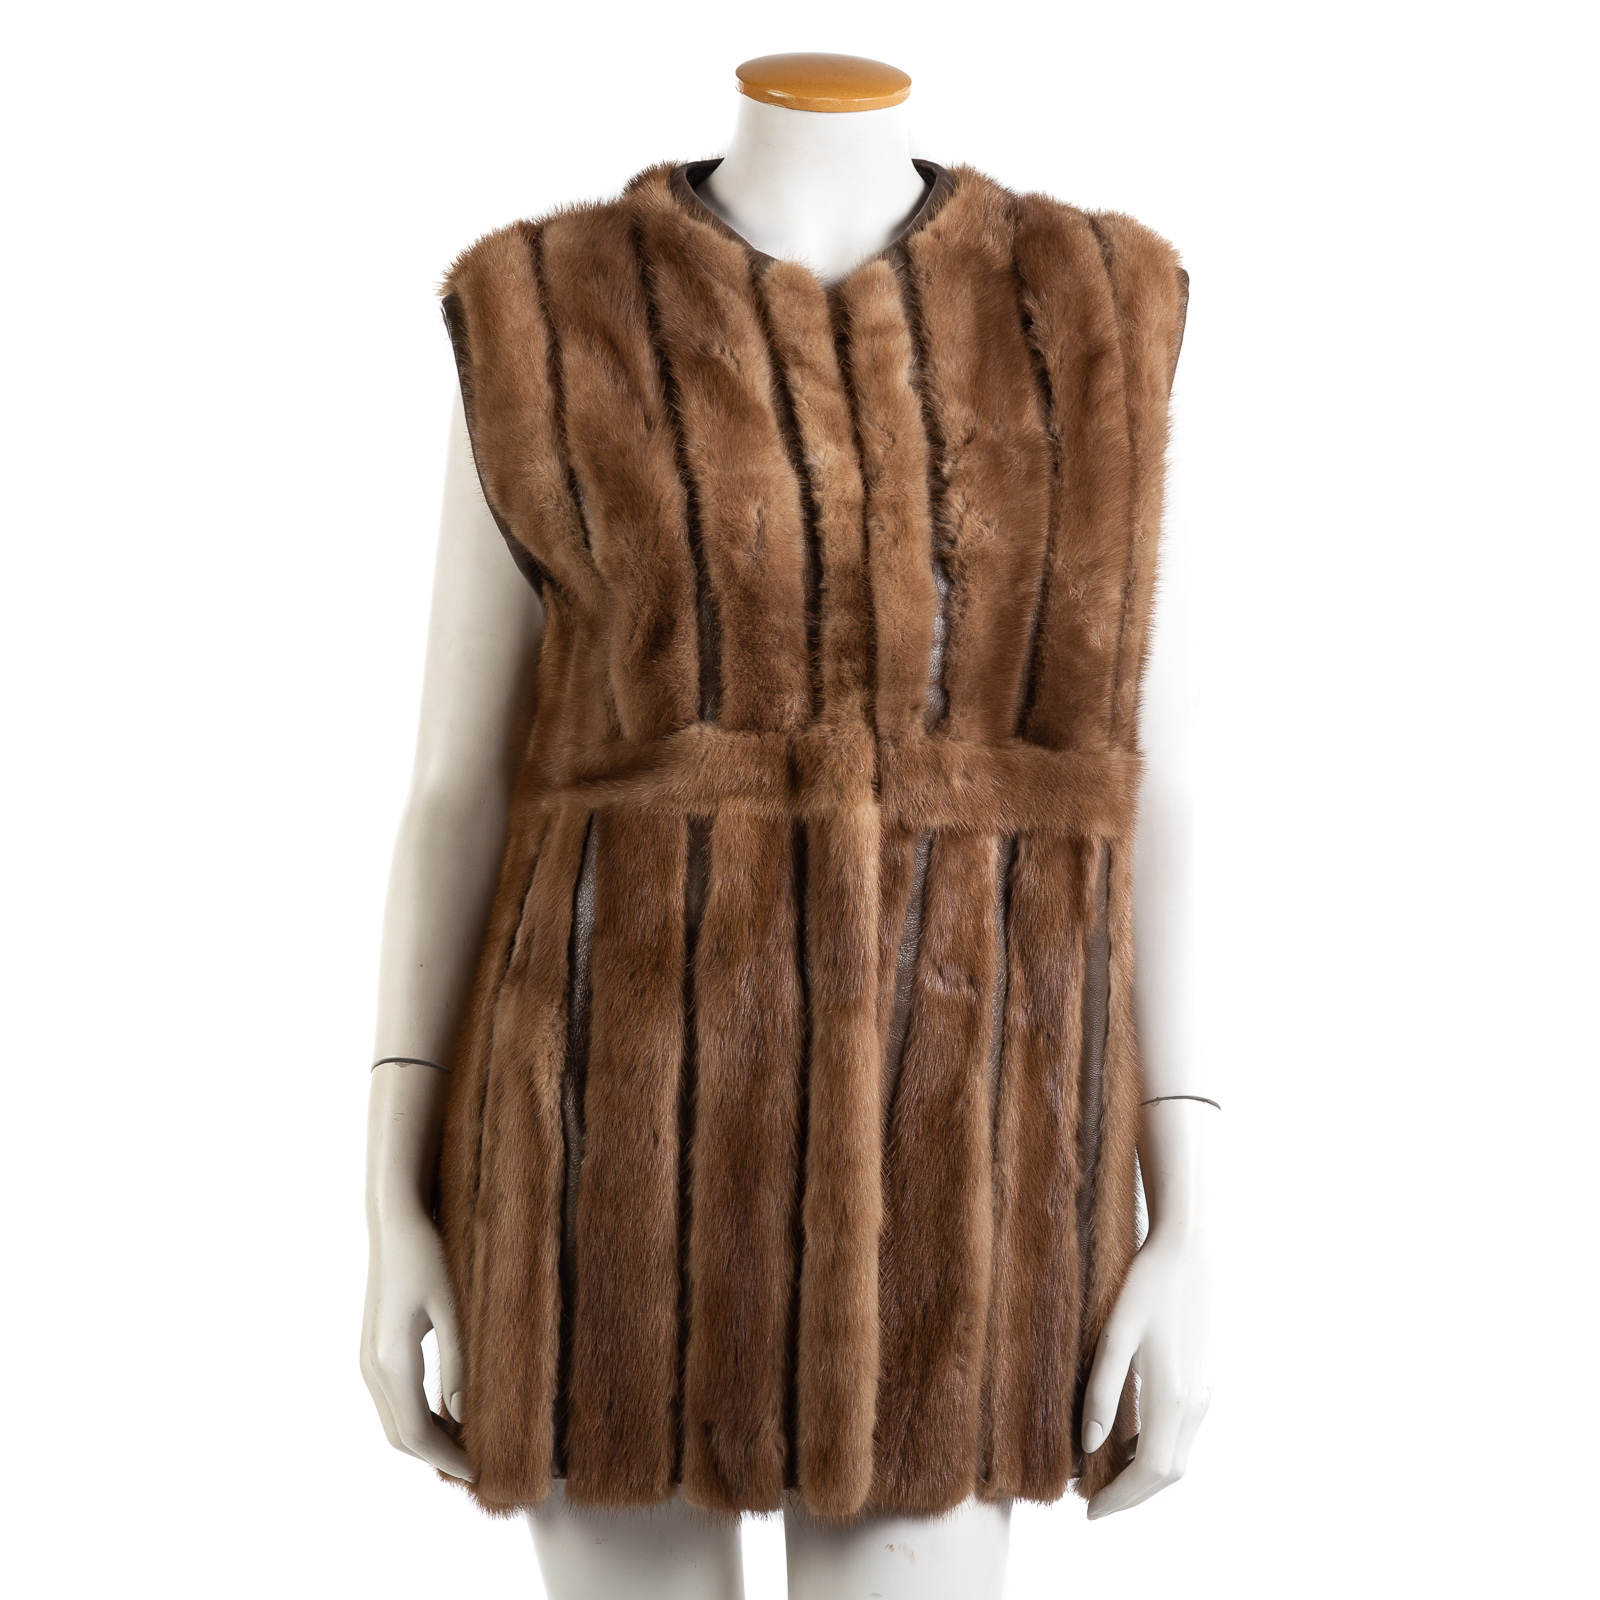 PIERRE WEST MINK AND LEATHER VEST 3358e3